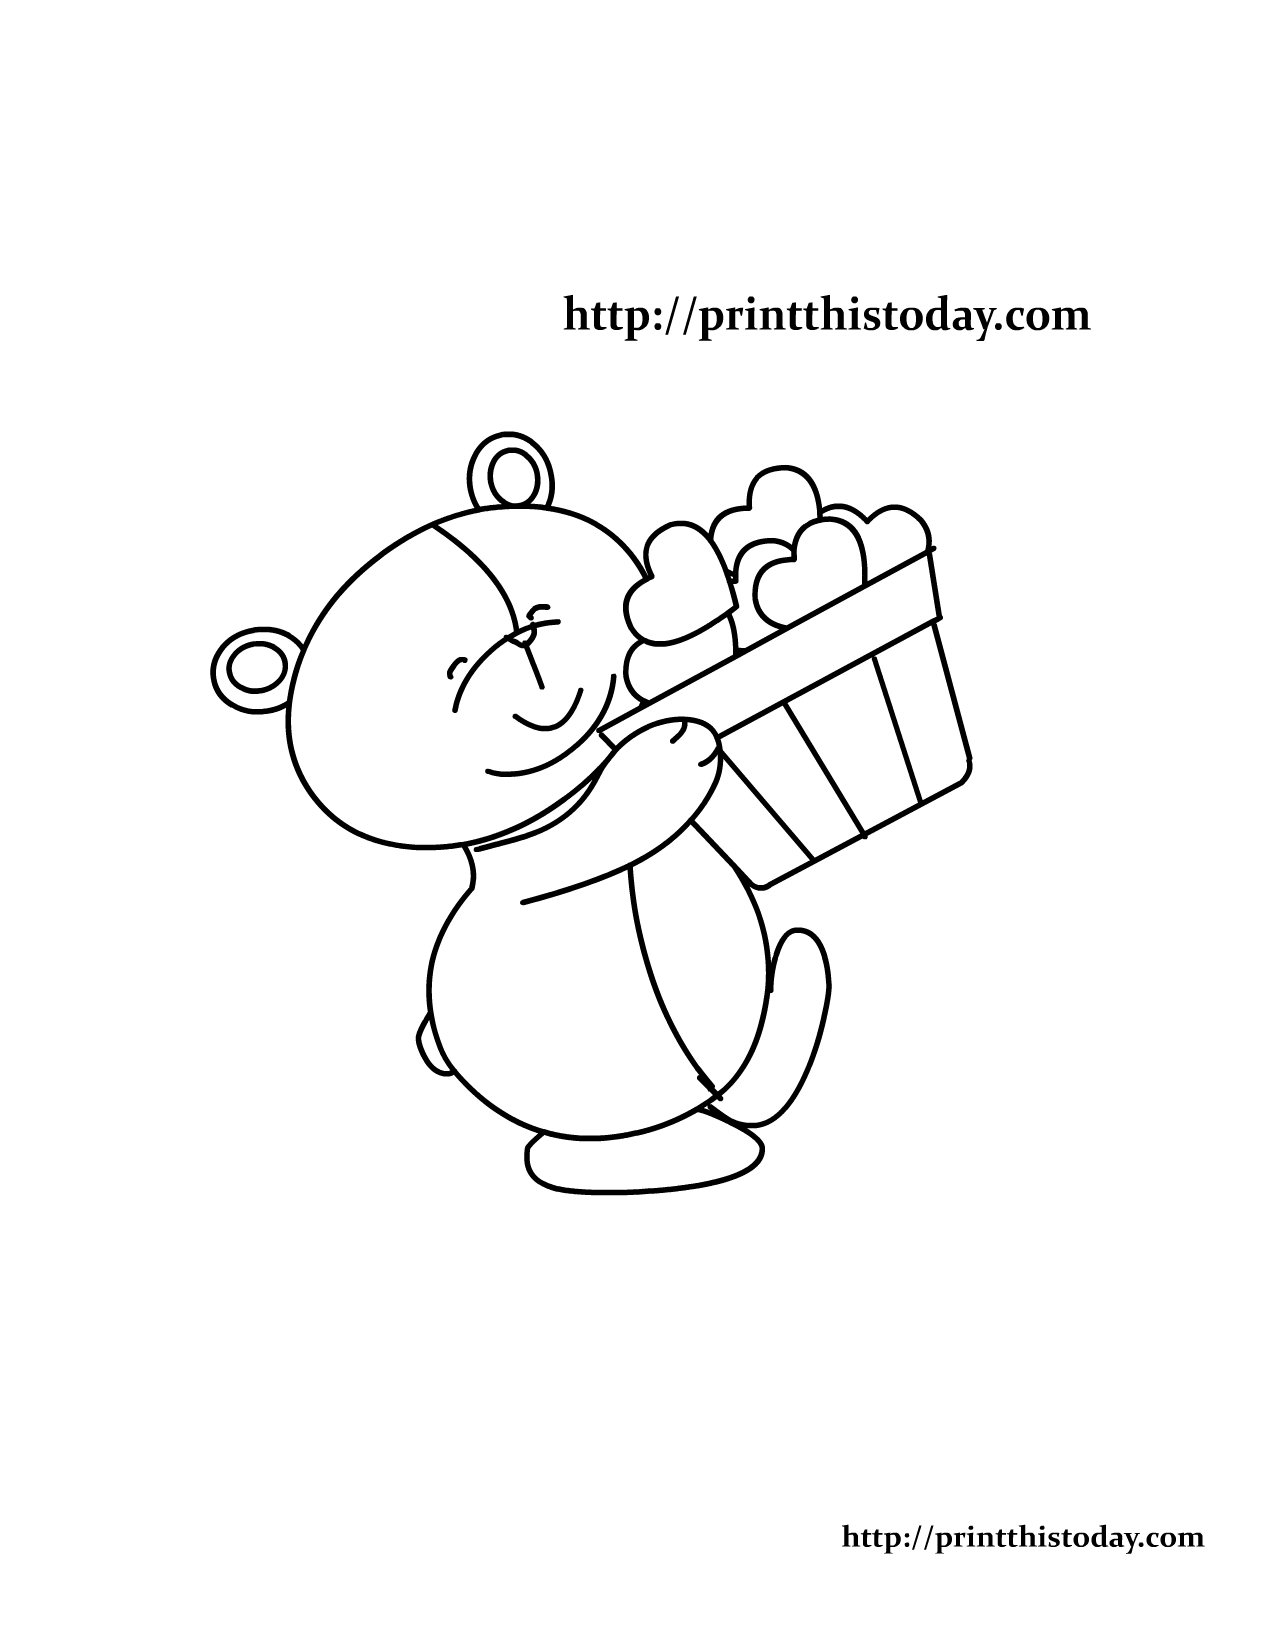 Teddy bear holding a basket of hearts coloring page